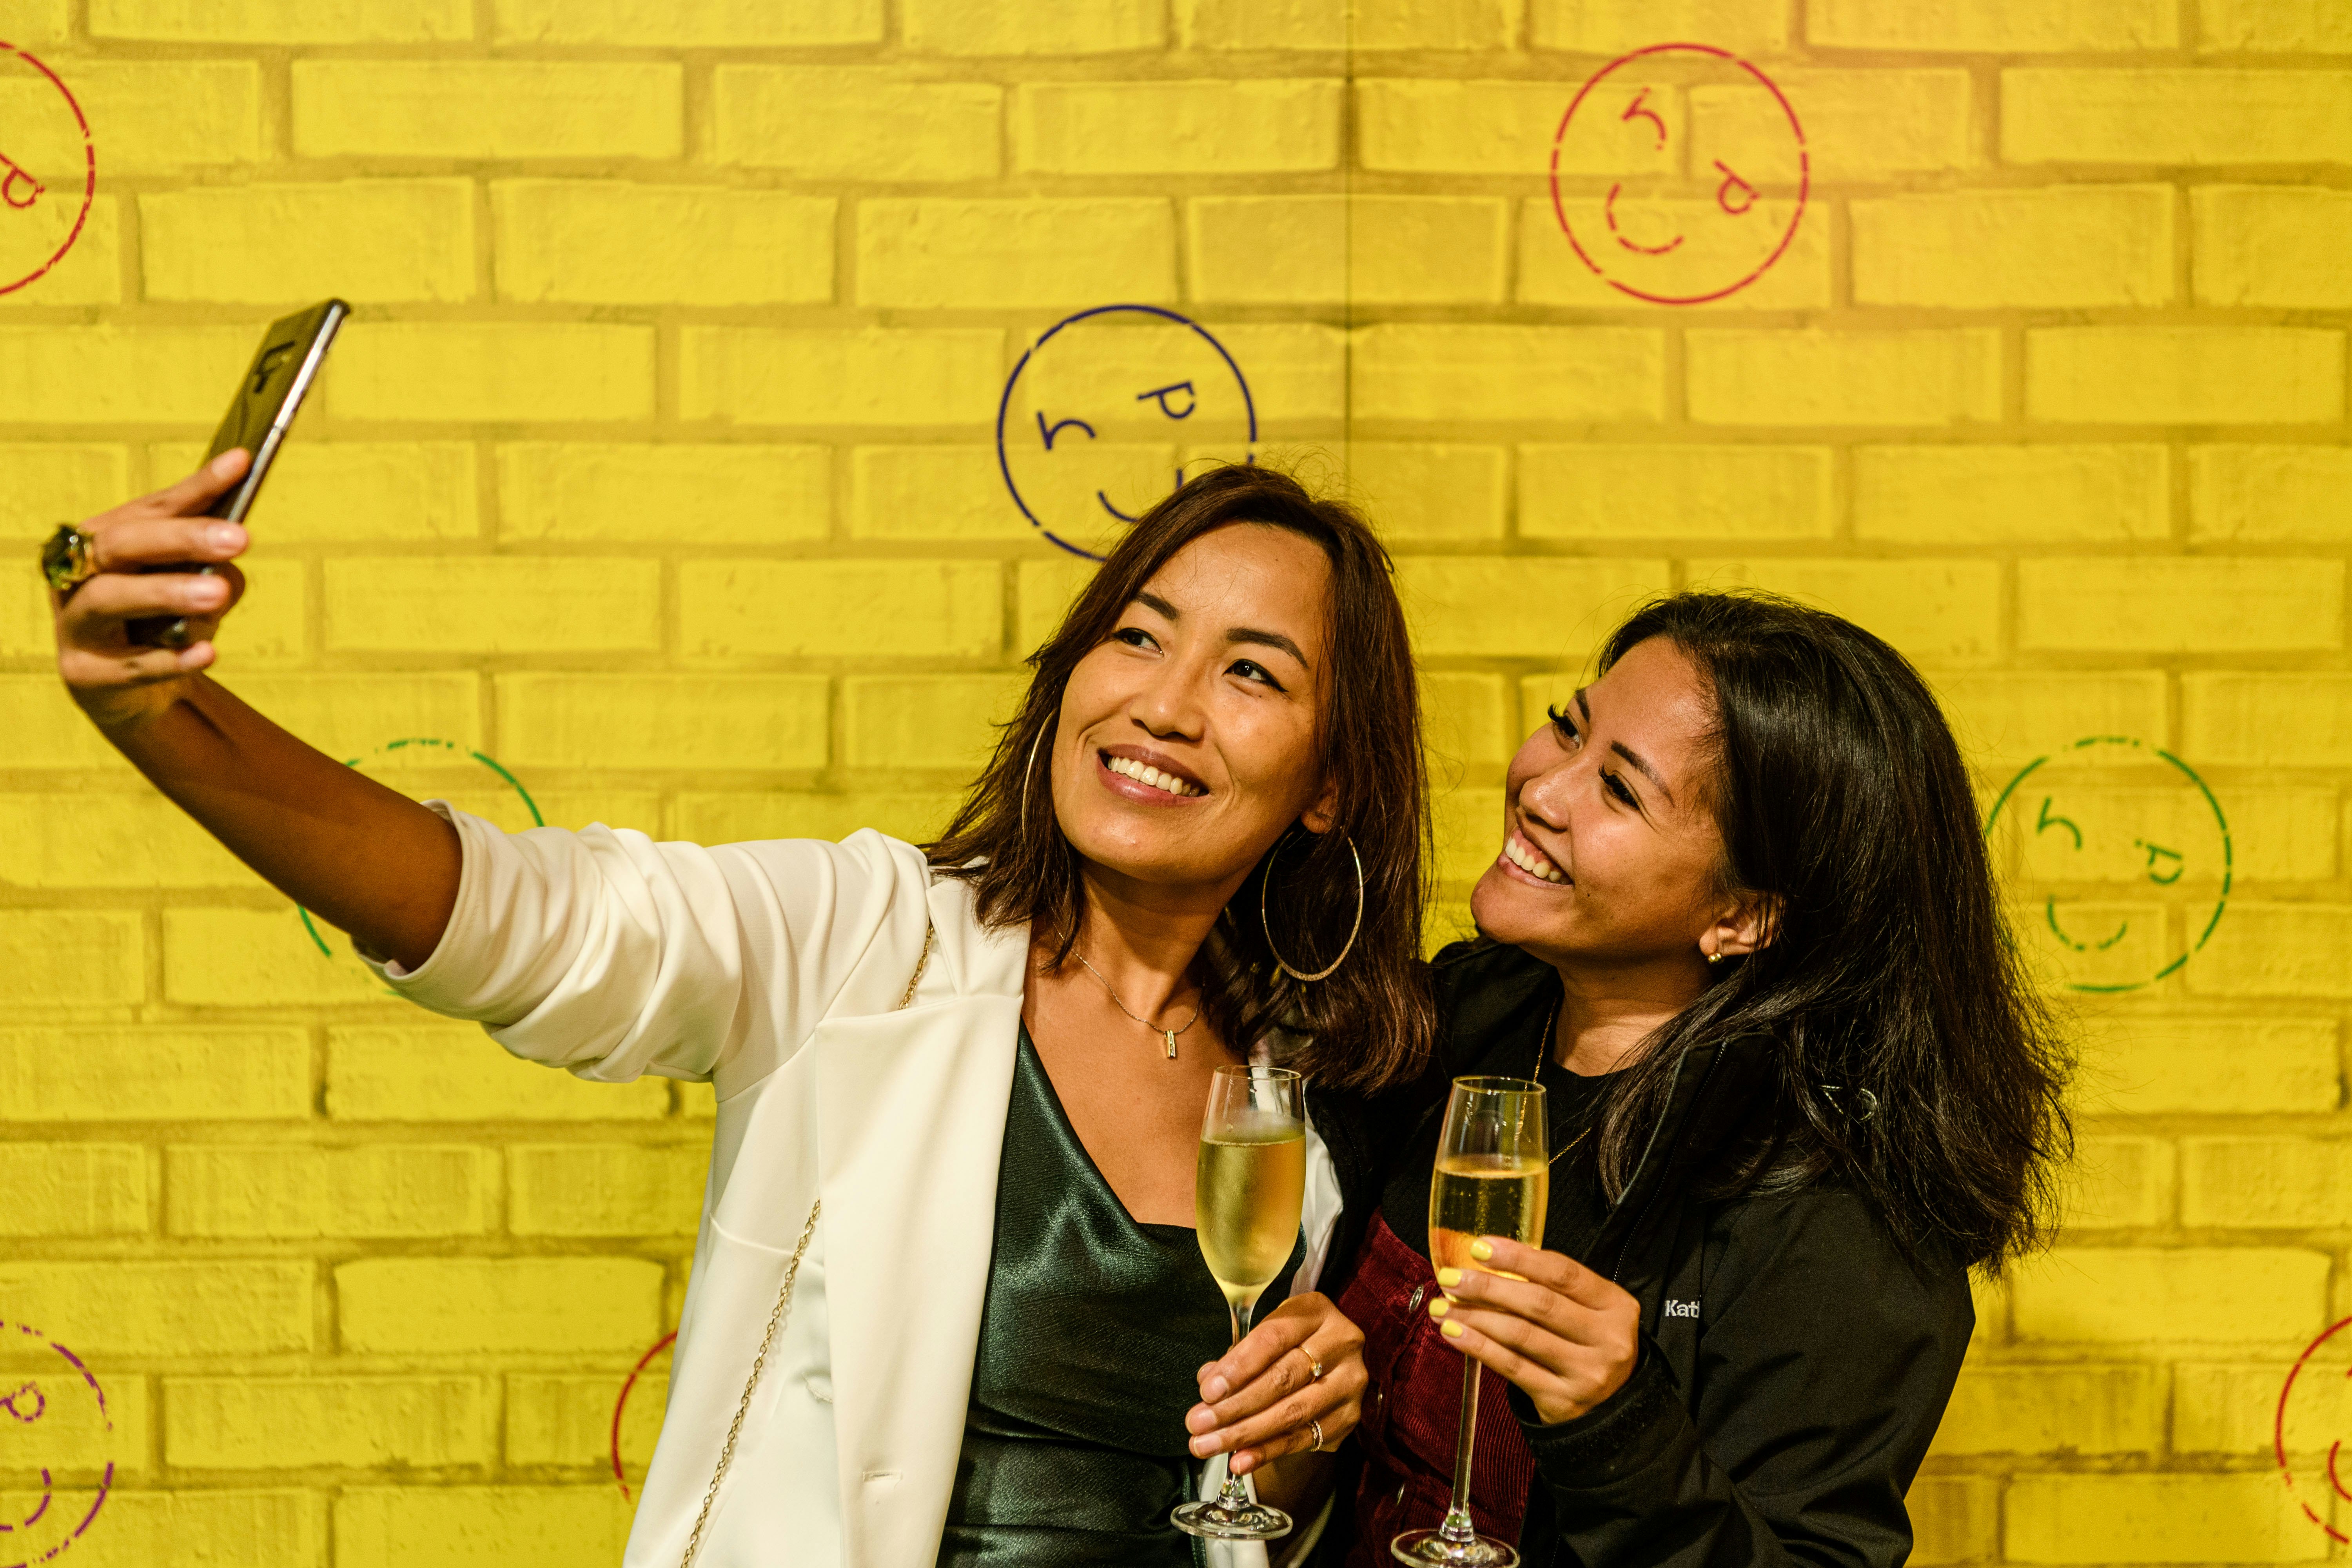 Two young women take a selfie against a bright yellow backdrop